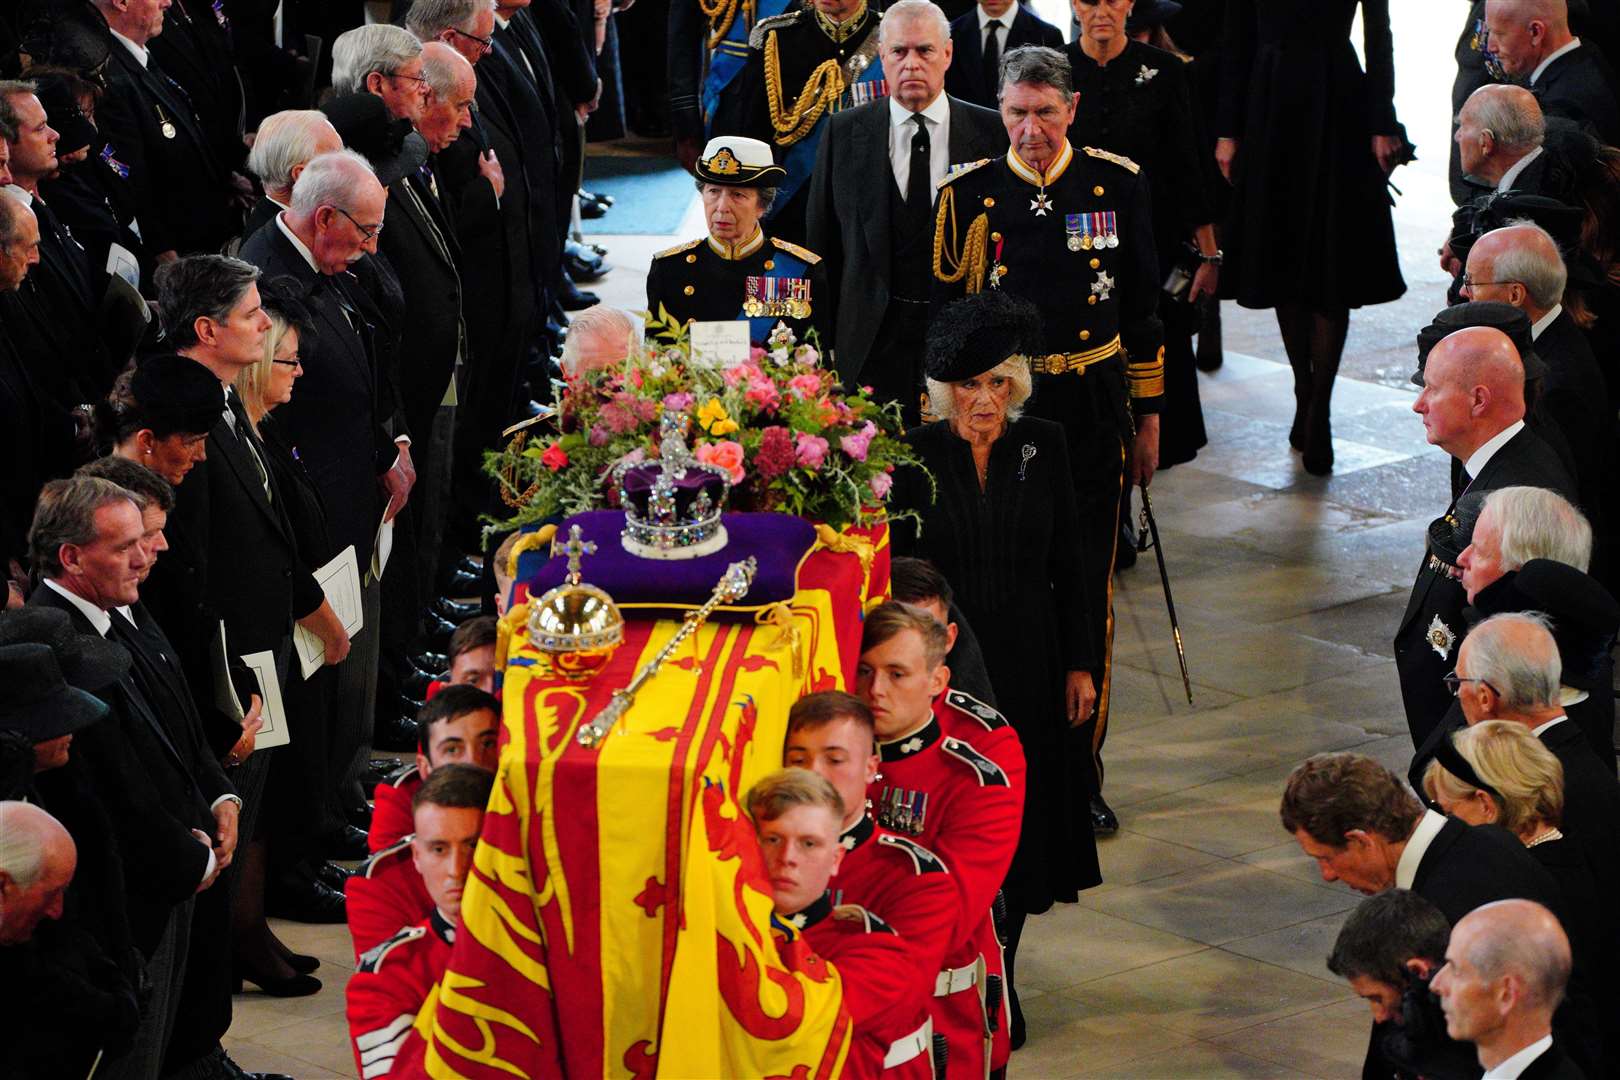 King Charles III and senior members of the royal family walk behind the coffin at the Committal Service for Queen Elizabeth II at Windsor Castle. Picture: PA